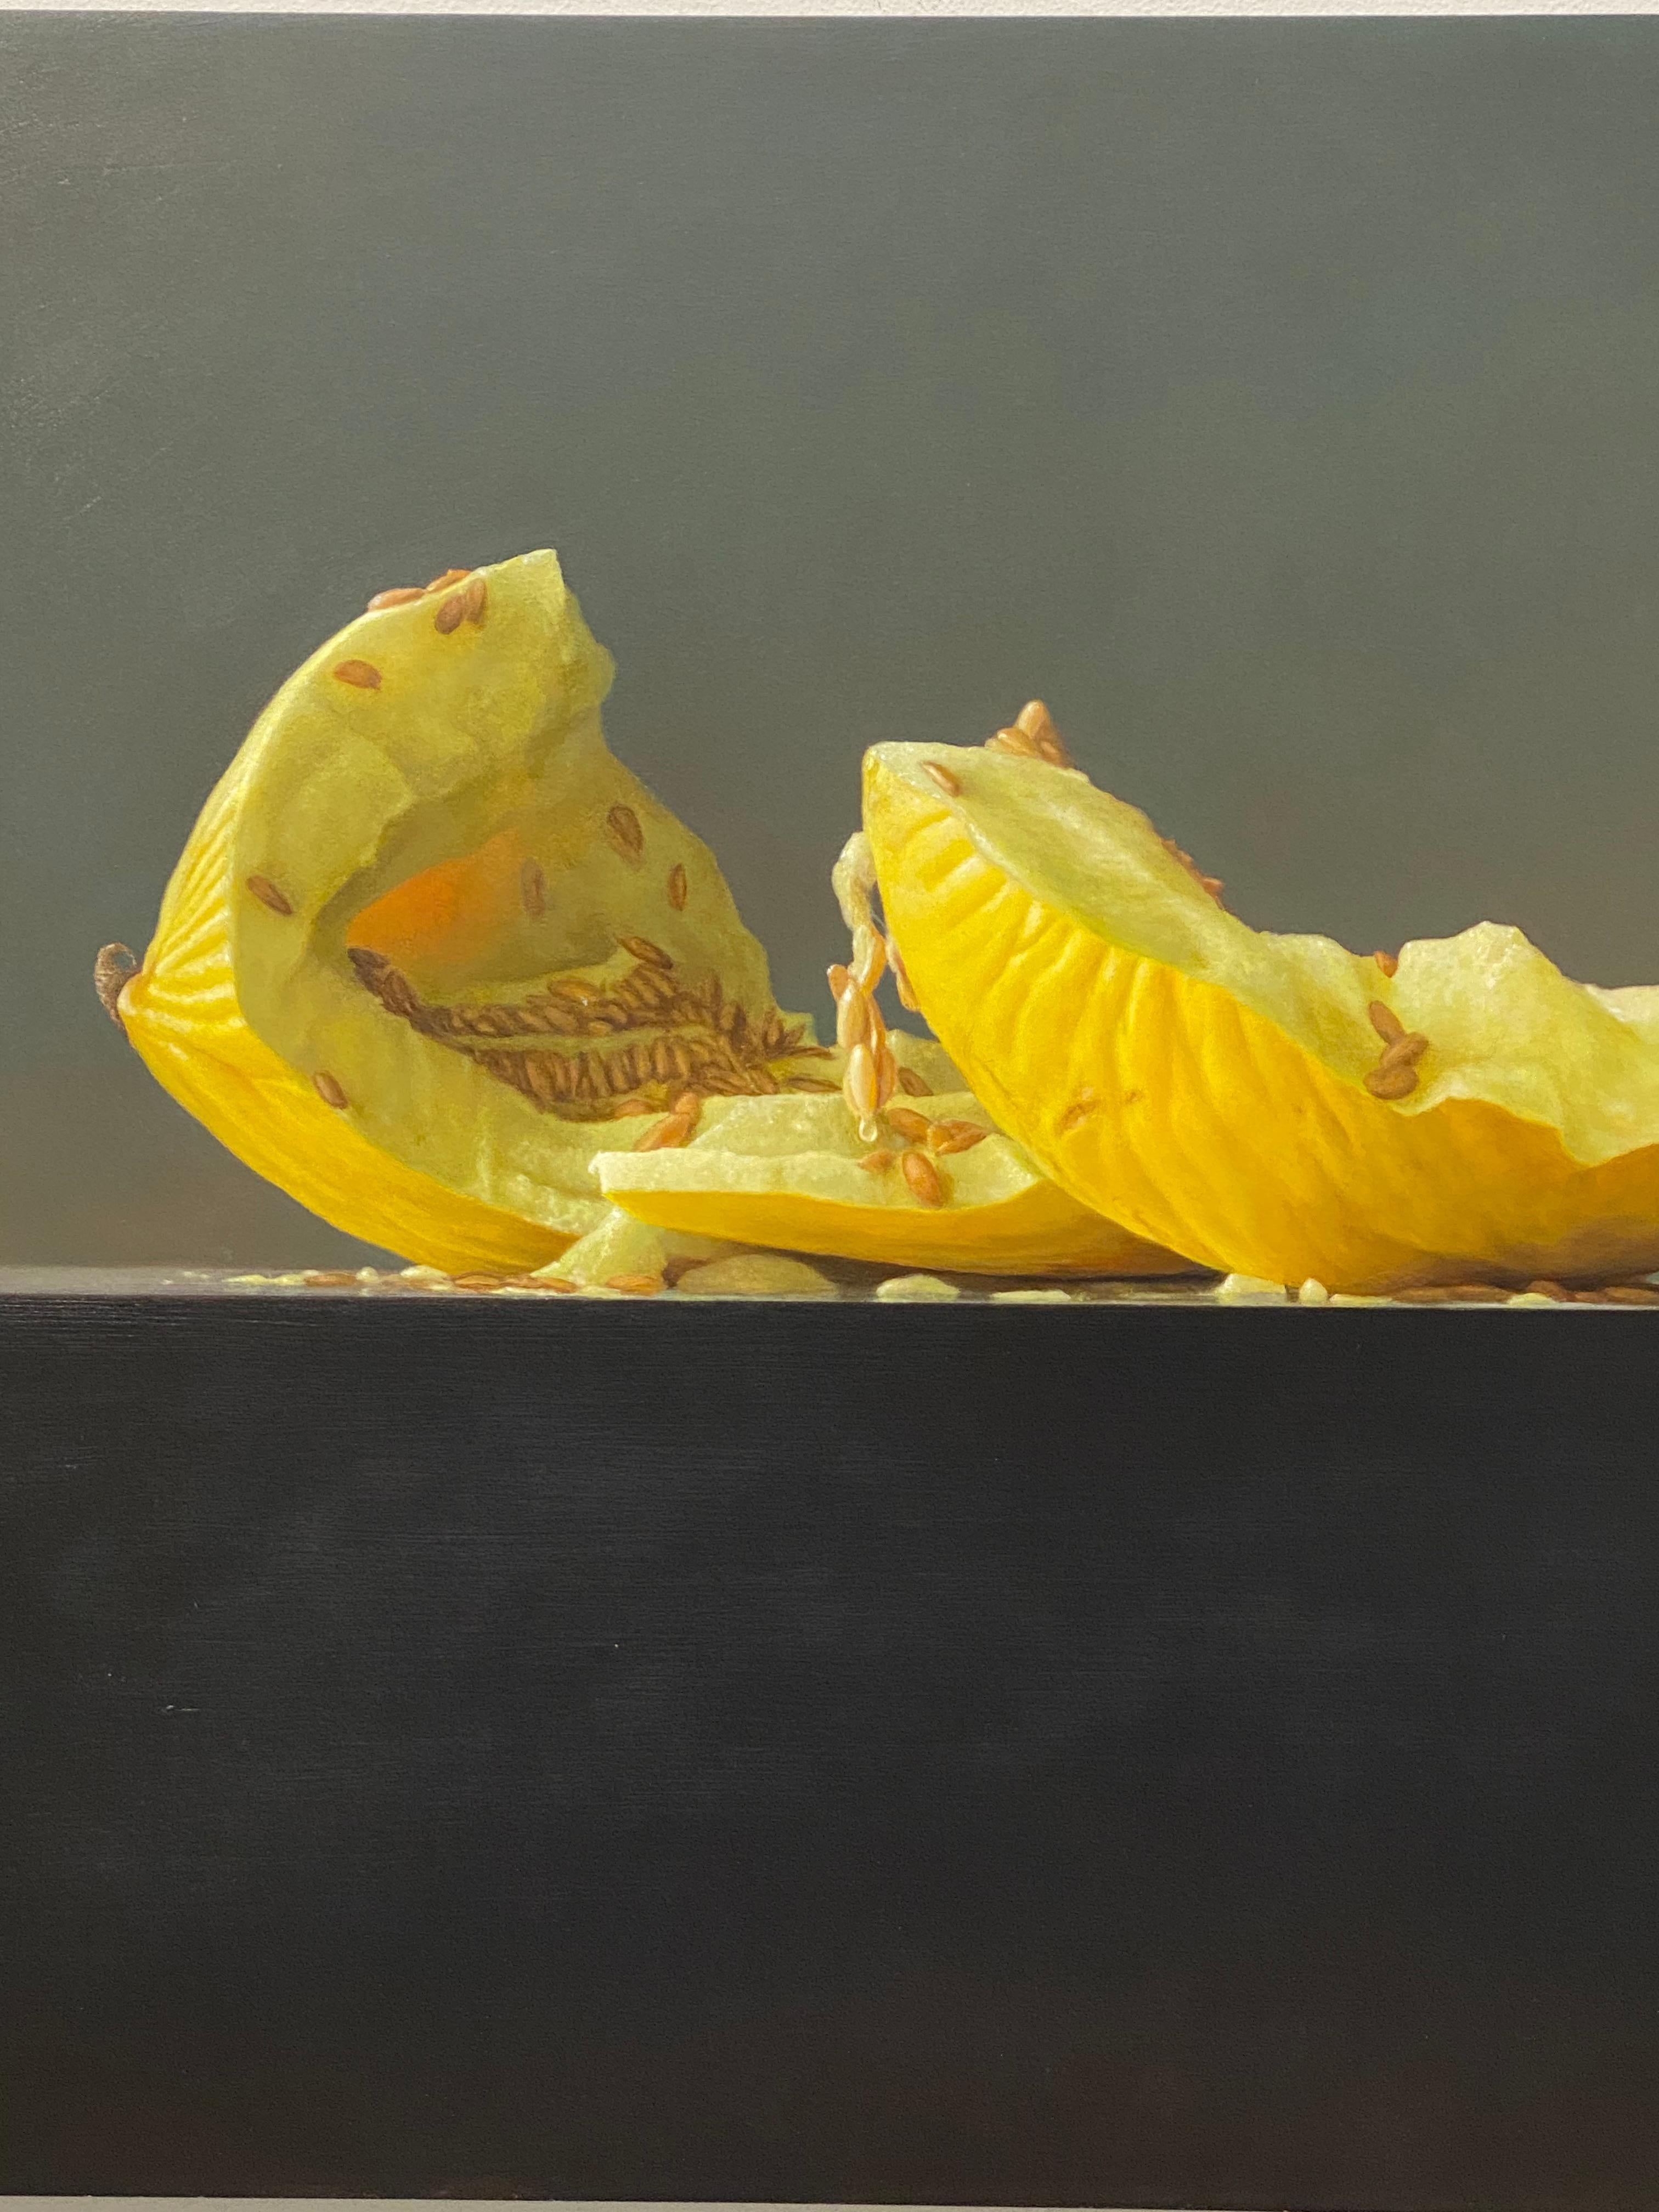 Honeydew Melo- 21st Century Still-life  painting of a yellow Melon - Black Figurative Painting by Bart Koning